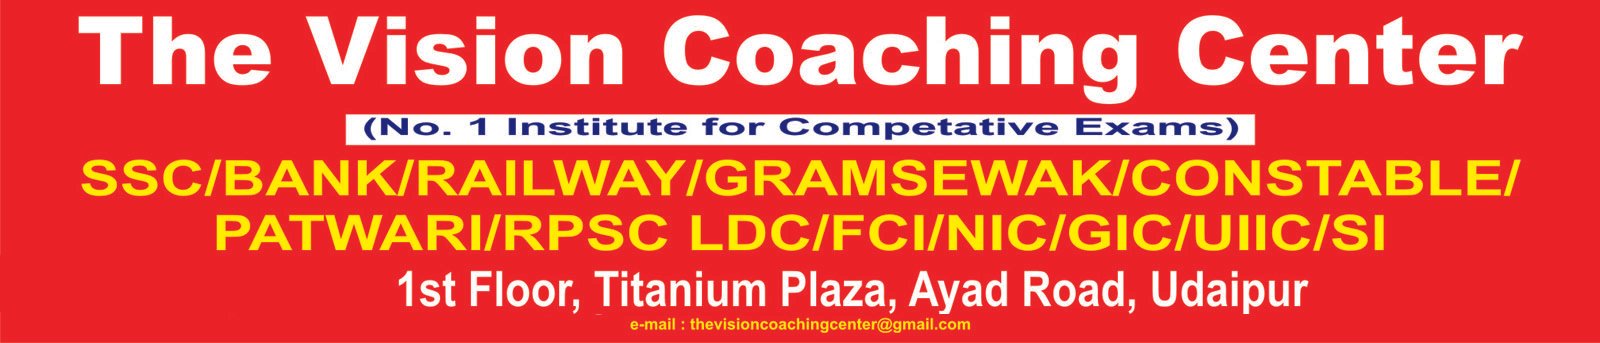 ssc-exam-coaching-center-in-udaipur